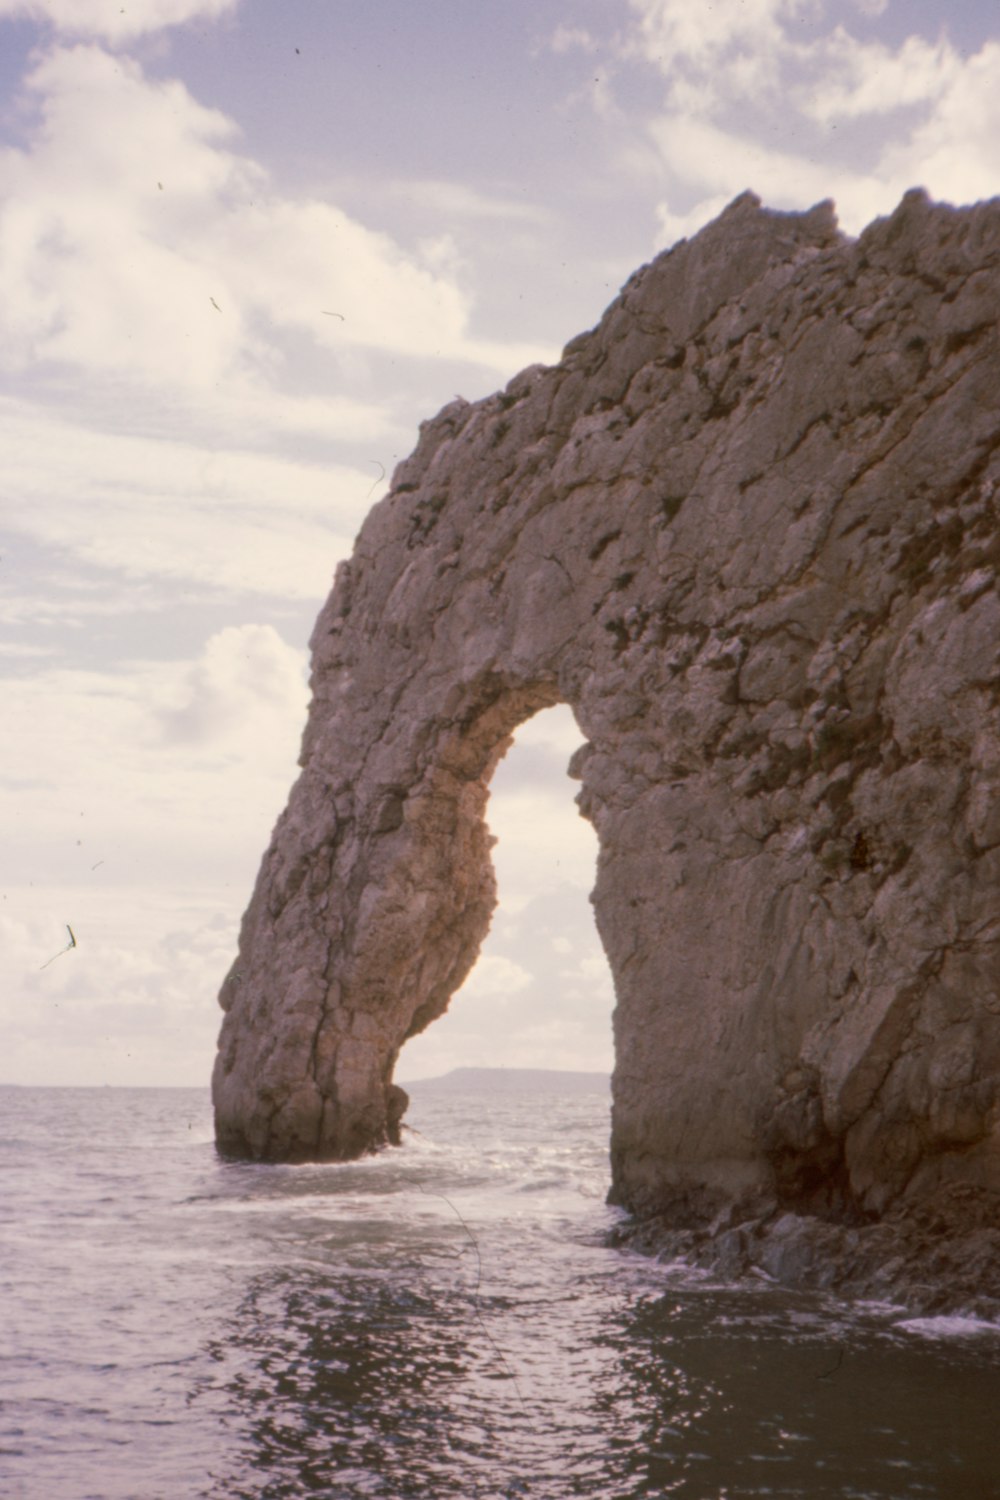 a large rock formation in the middle of the ocean